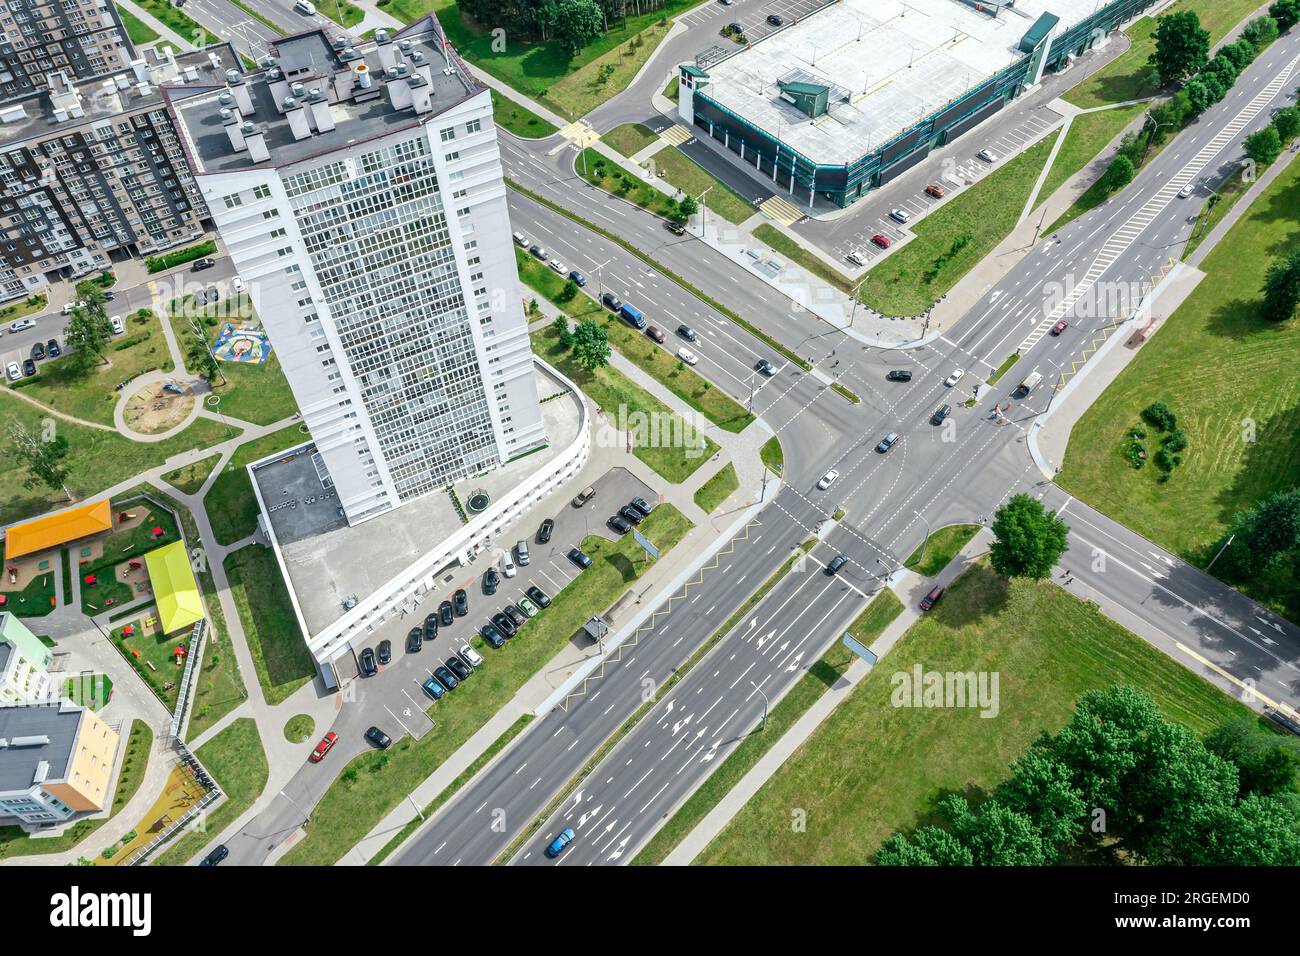 streets intersection at the city. urban landscape on a sunny summer day. Stock Photo